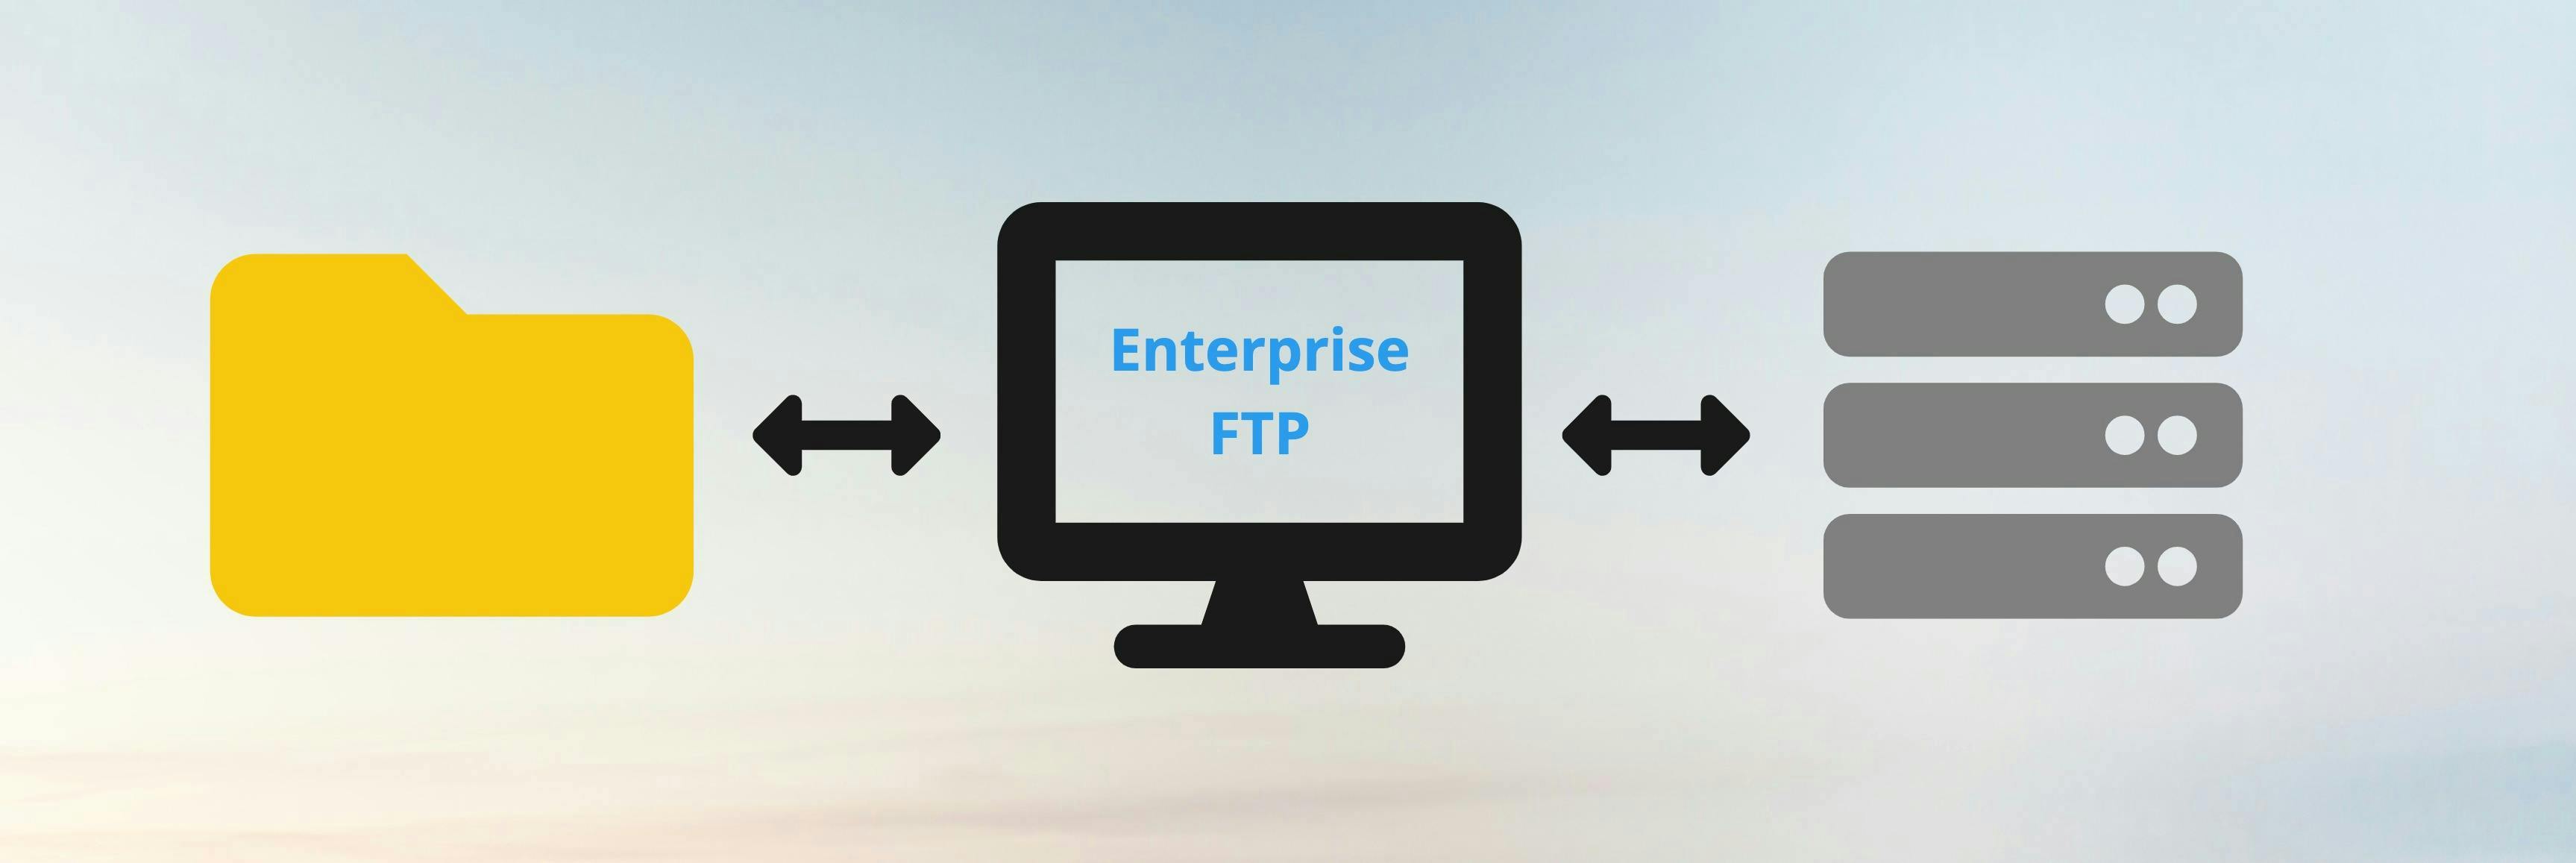 Automate files to servers with Enterprise FTP.